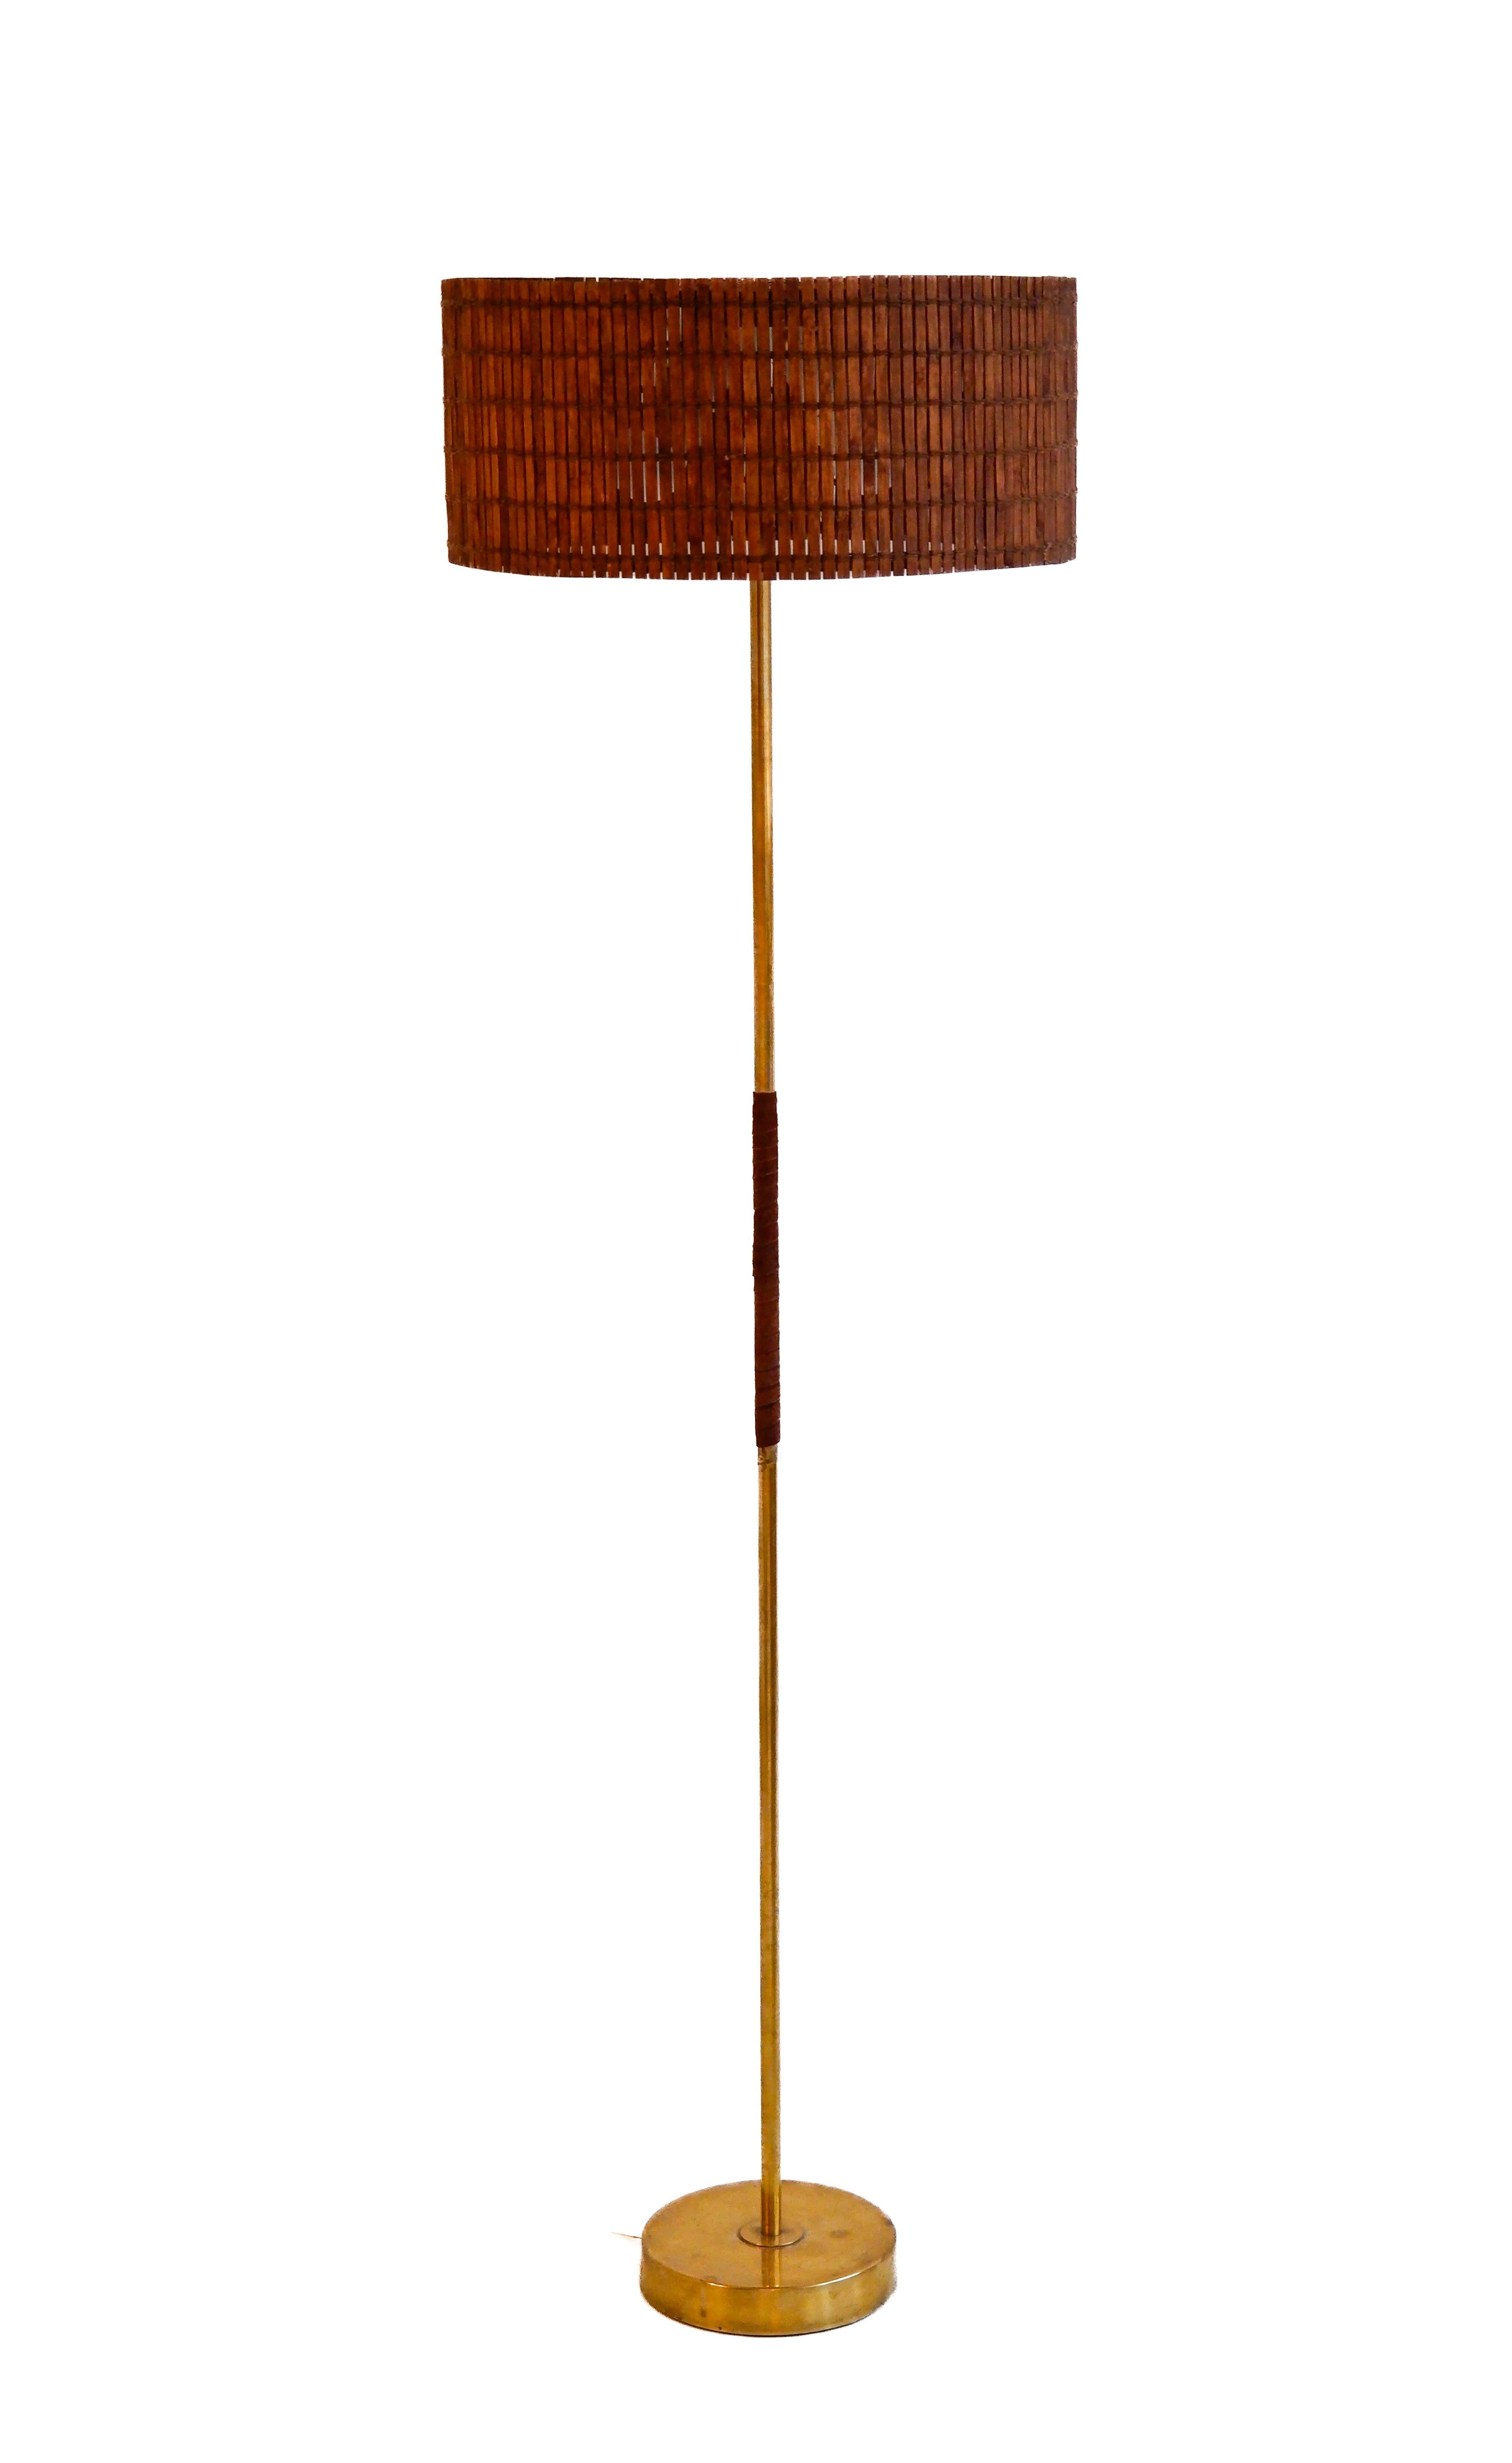 Finnish vintage floor lamp designed and produced by the light factory Presenta in the 60's. The lamp is made in solid brass, has a leather detail on its core and a rattan shade. Good overhall condition ! The lamp is stamped by the editor Presenta.